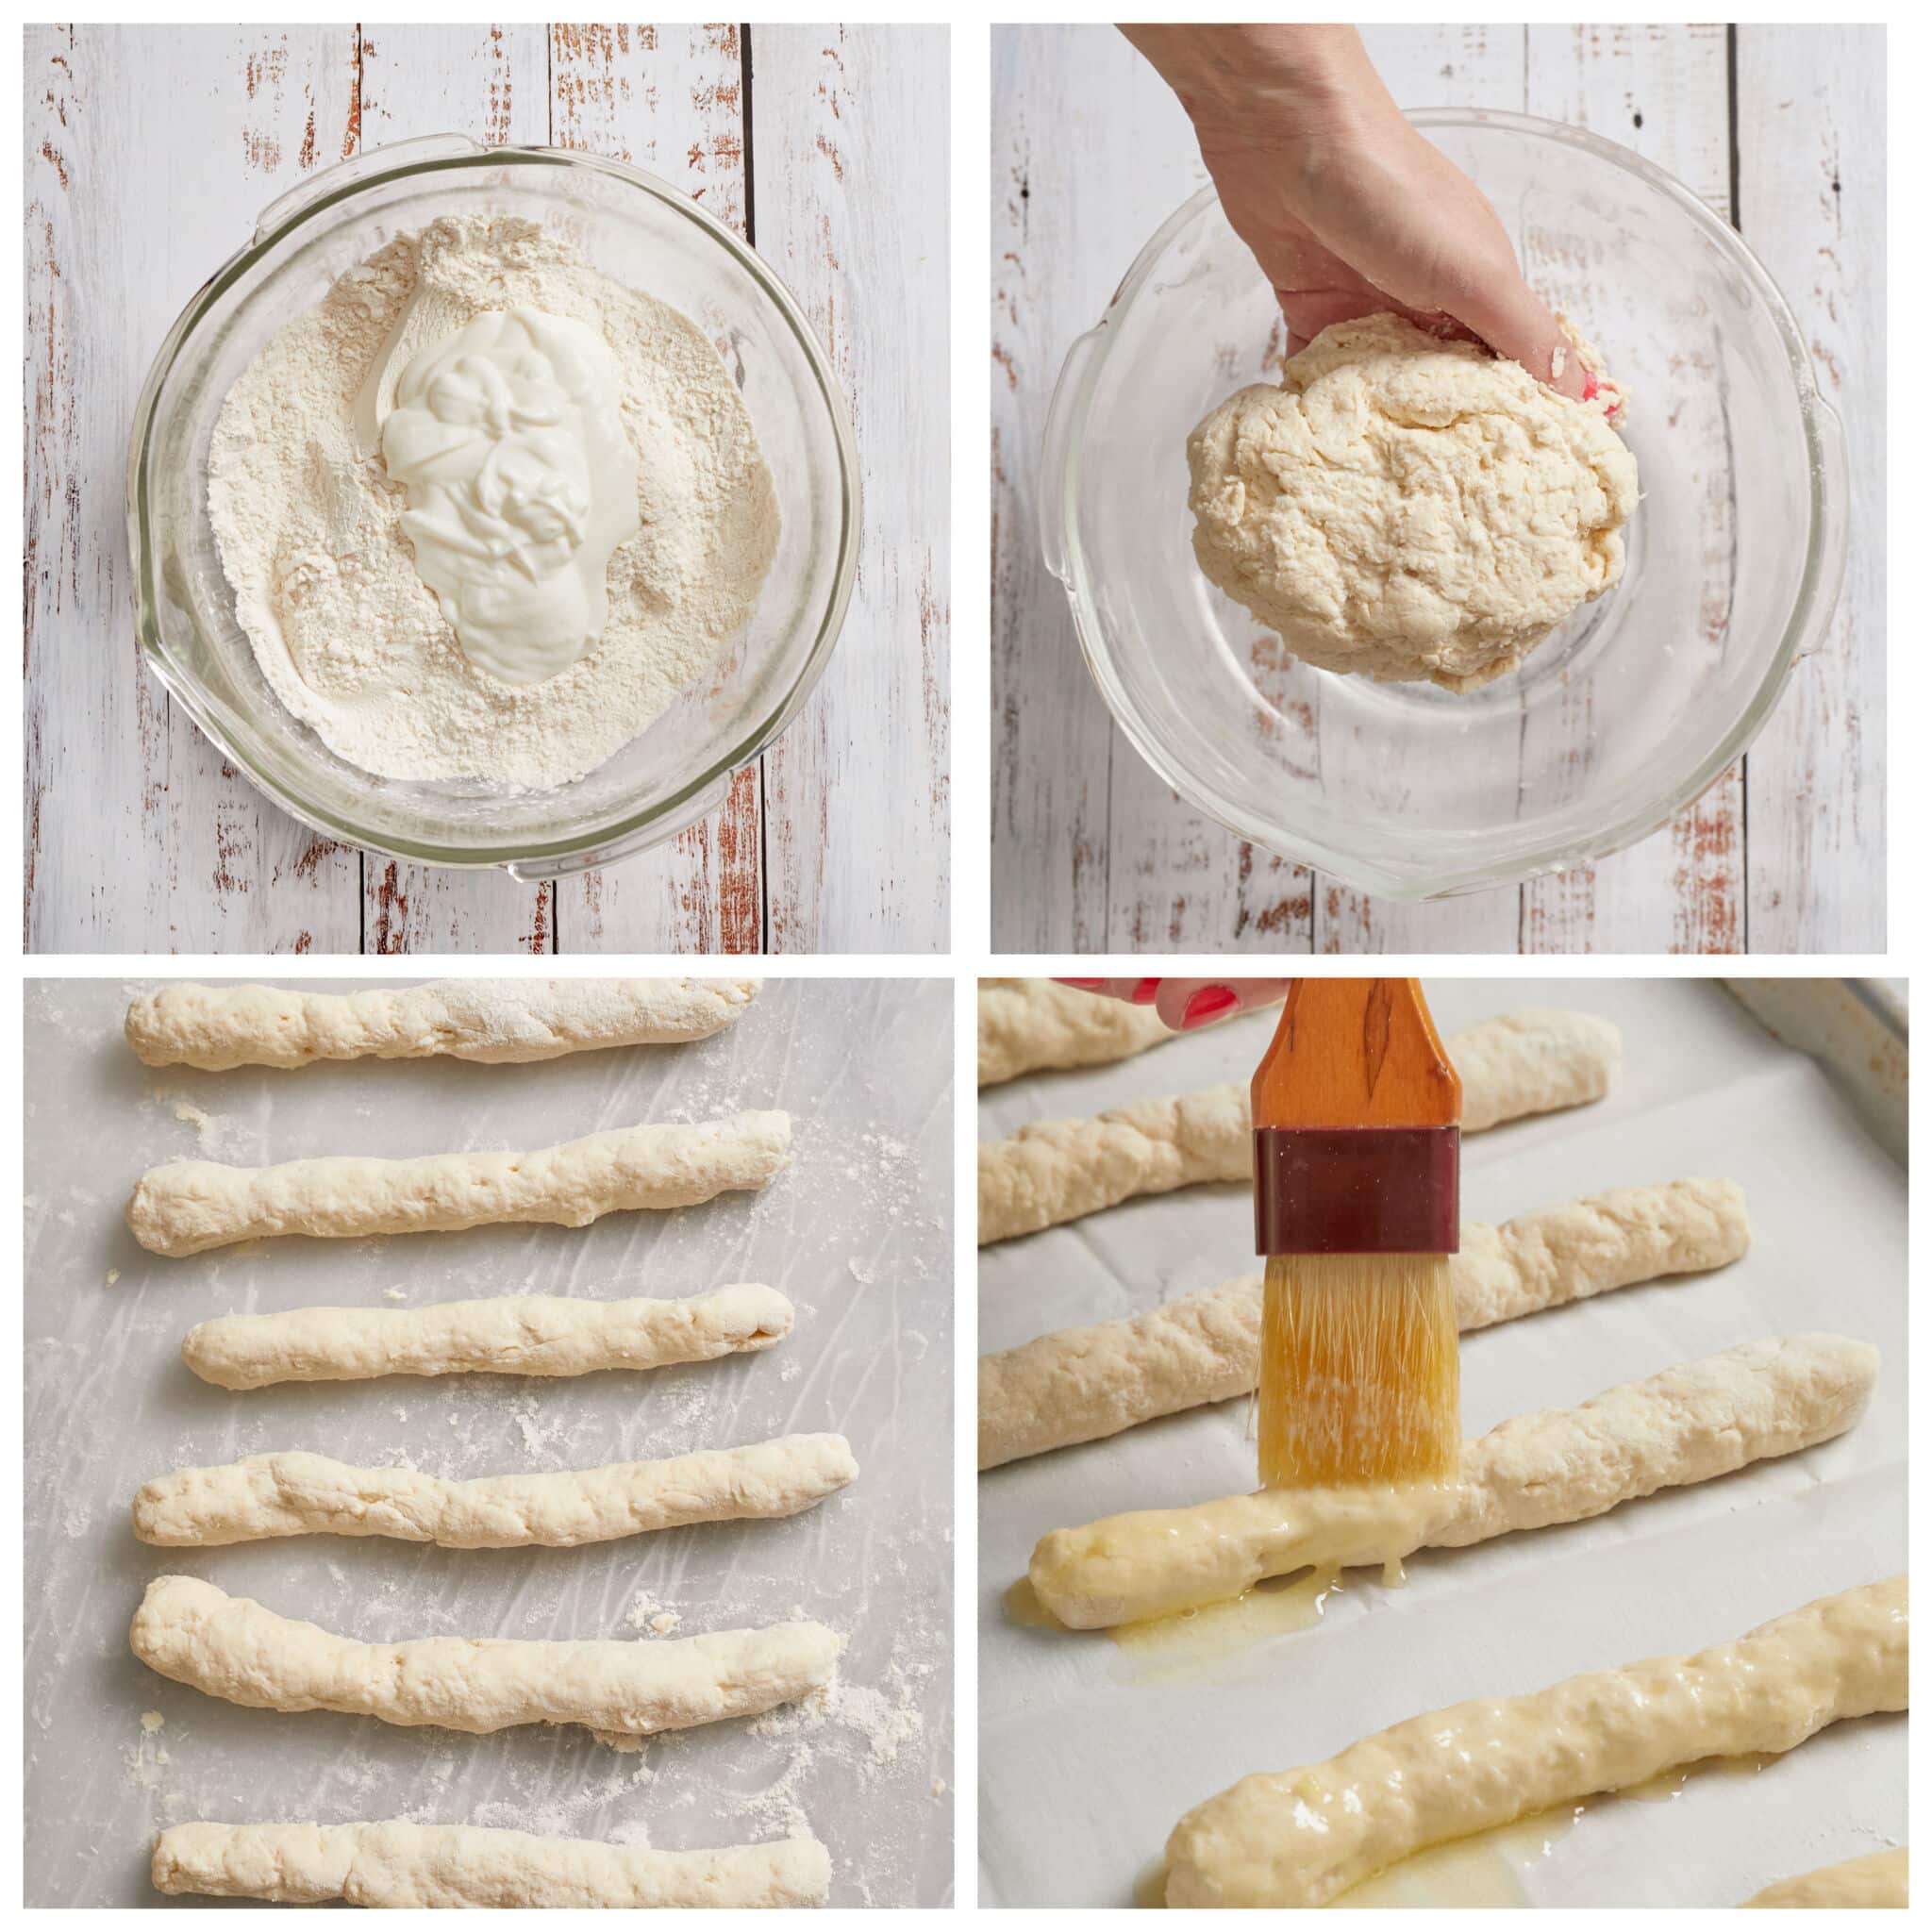 Step-by-step instructions how to make breadsticks at home: mix dry ingredients, add yogurt and mix until get a smooth dough, shape into sticks, then brush with egg wash before baking. 